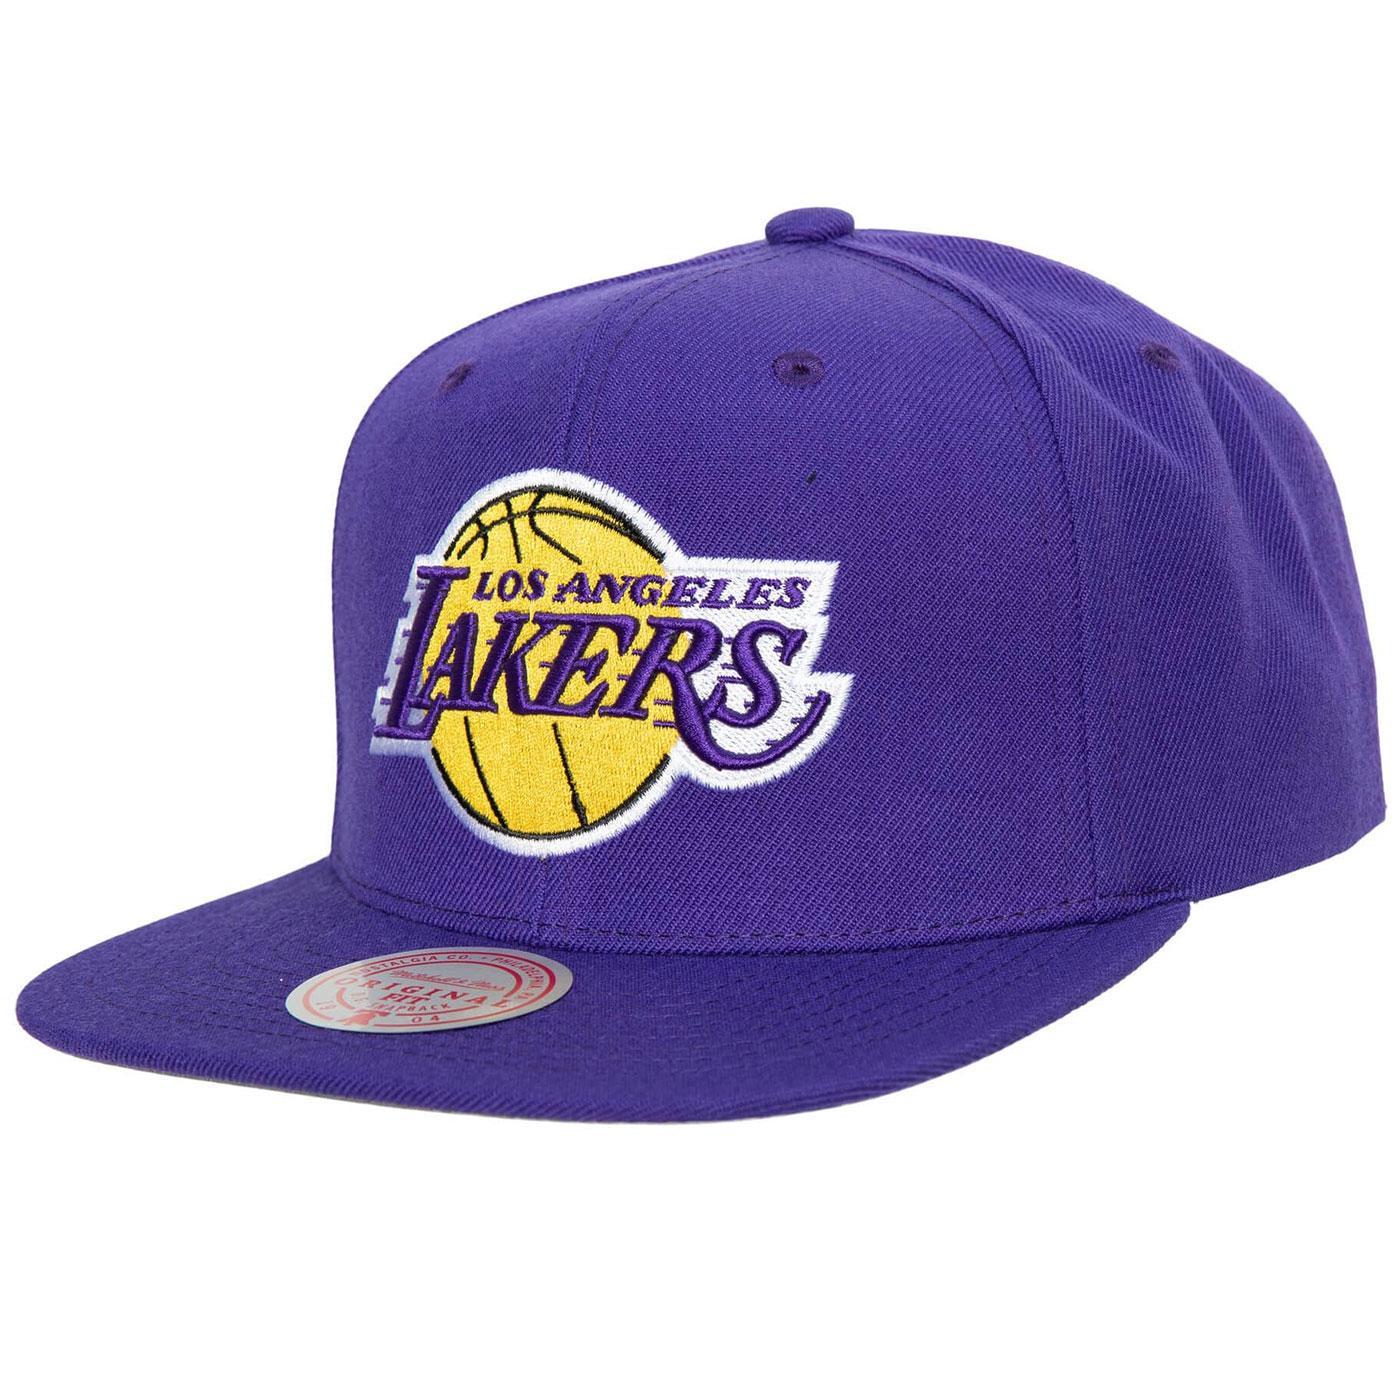 Team Ground 2.0 Snapback Los Angeles Lakers | Mitchell & Ness